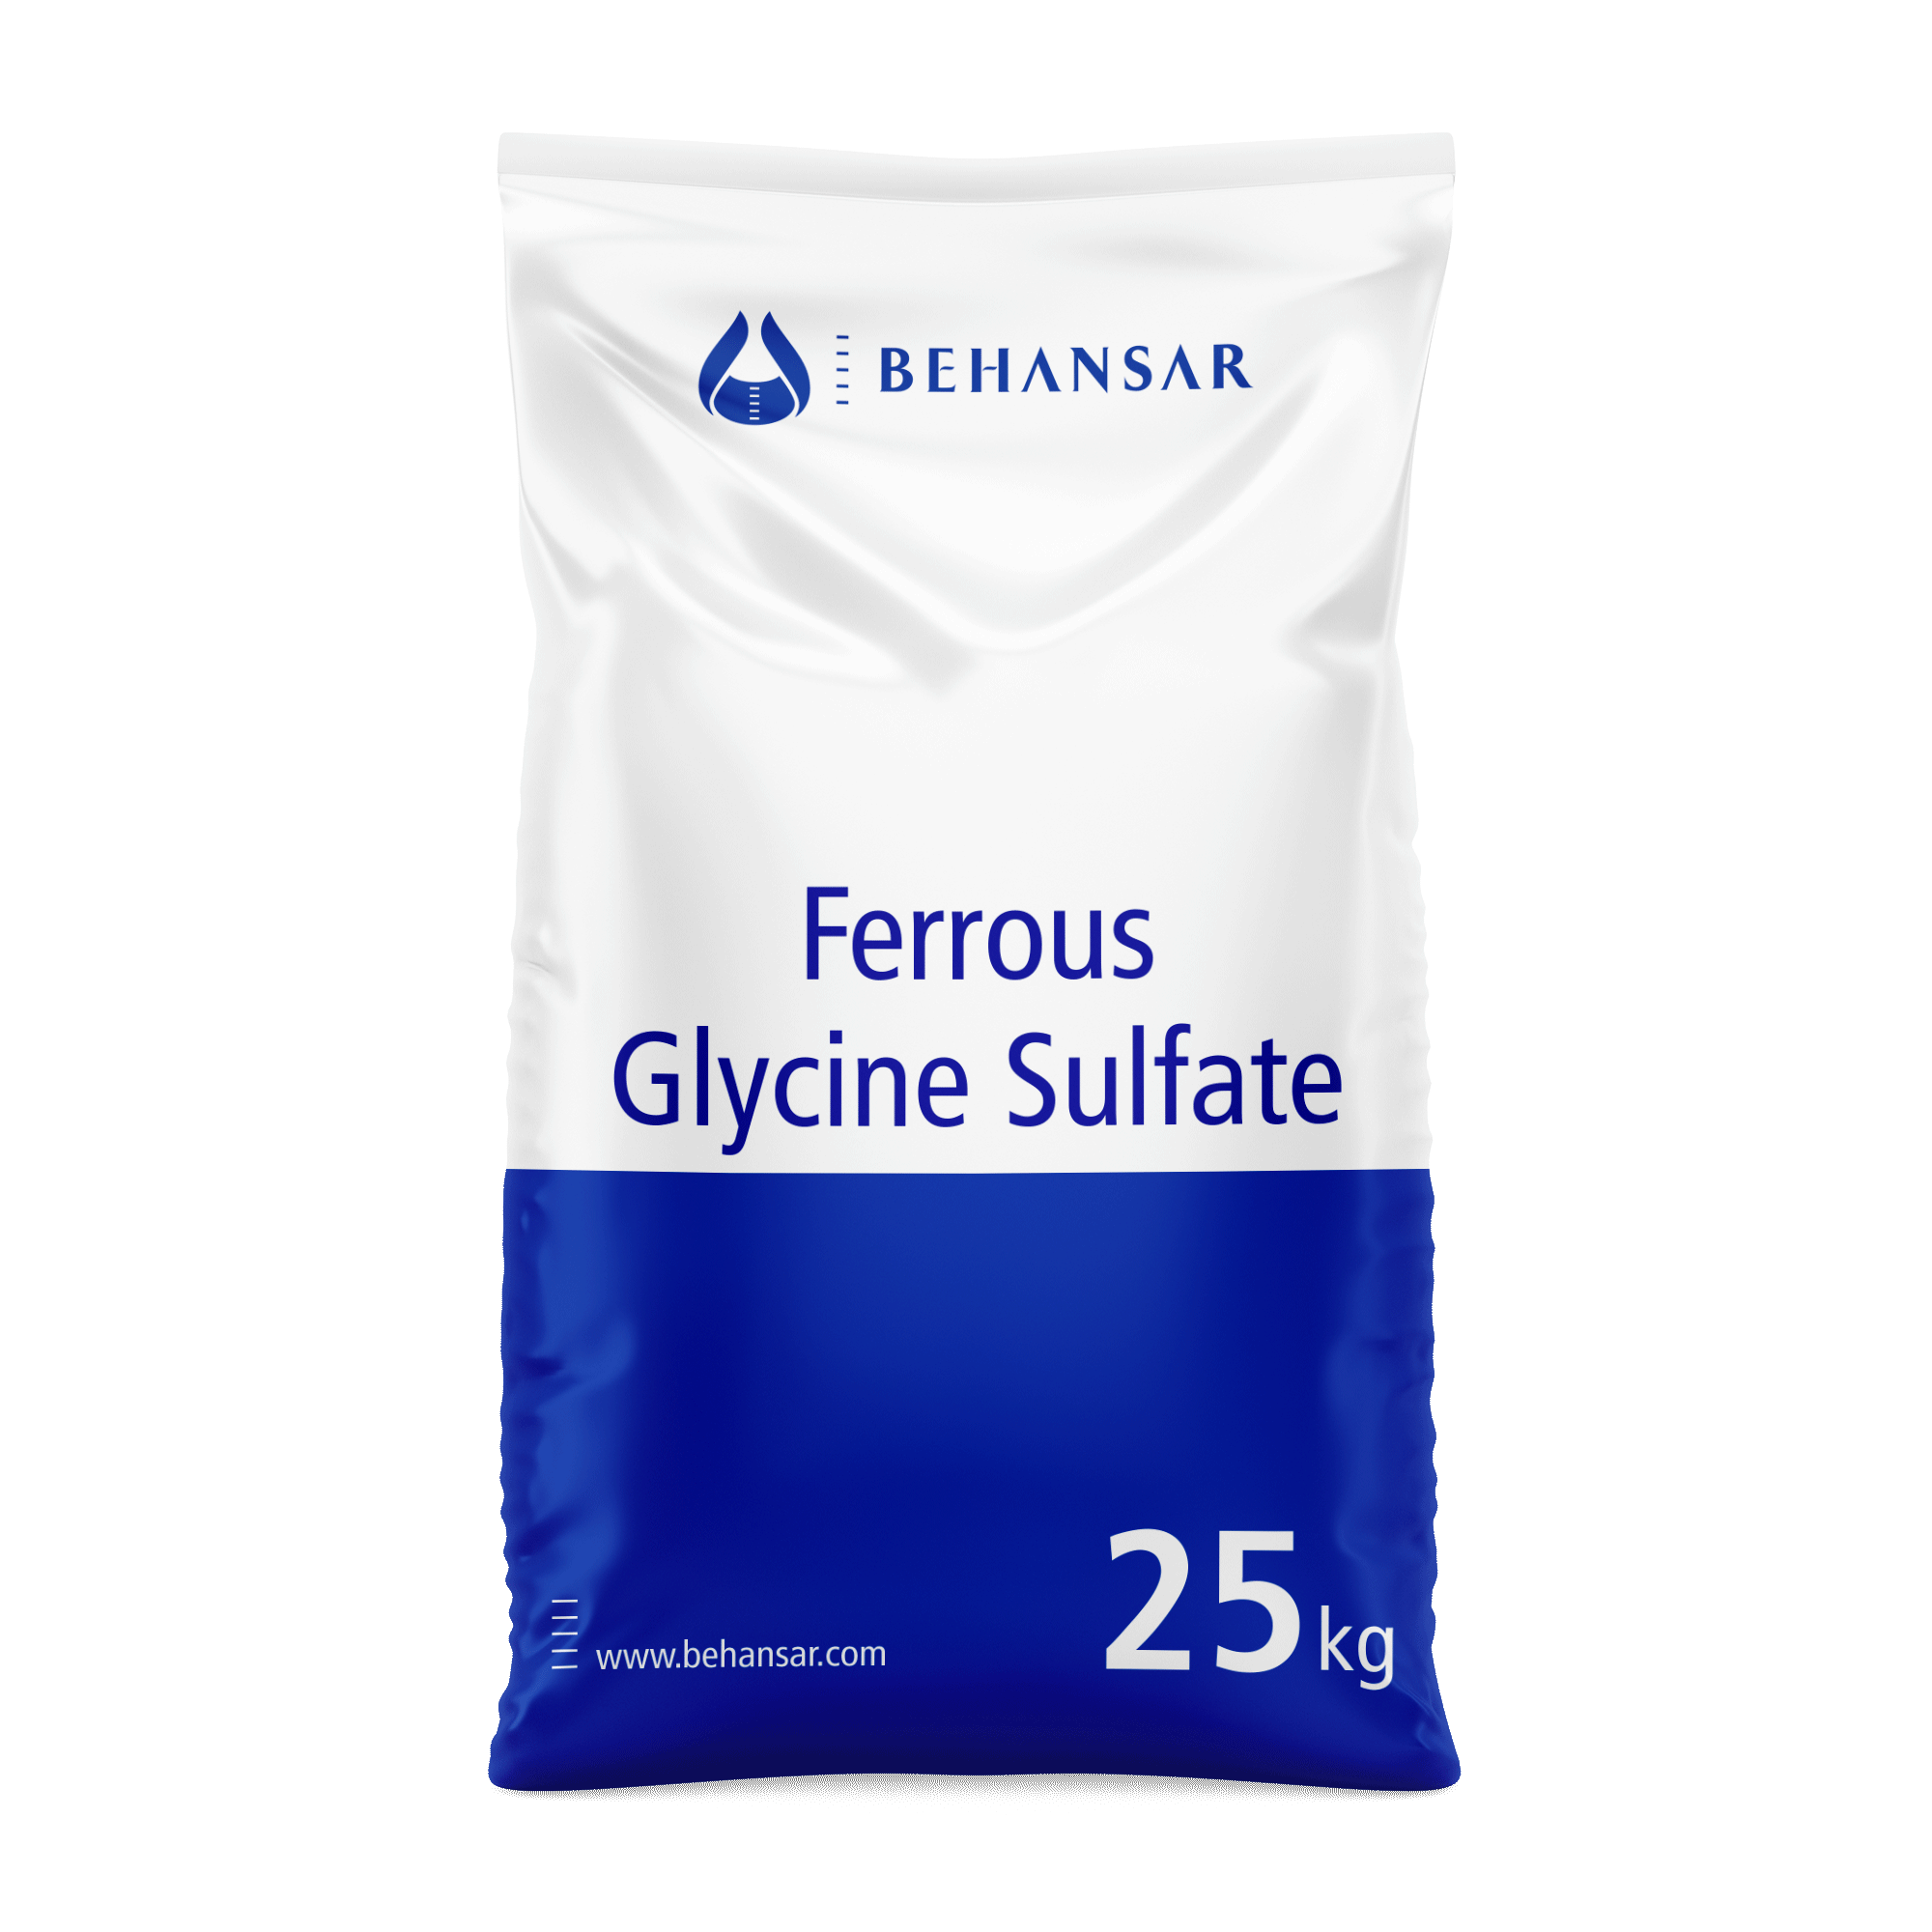 Ferrous Glycine Sulfate is one of the products of Behansar Co